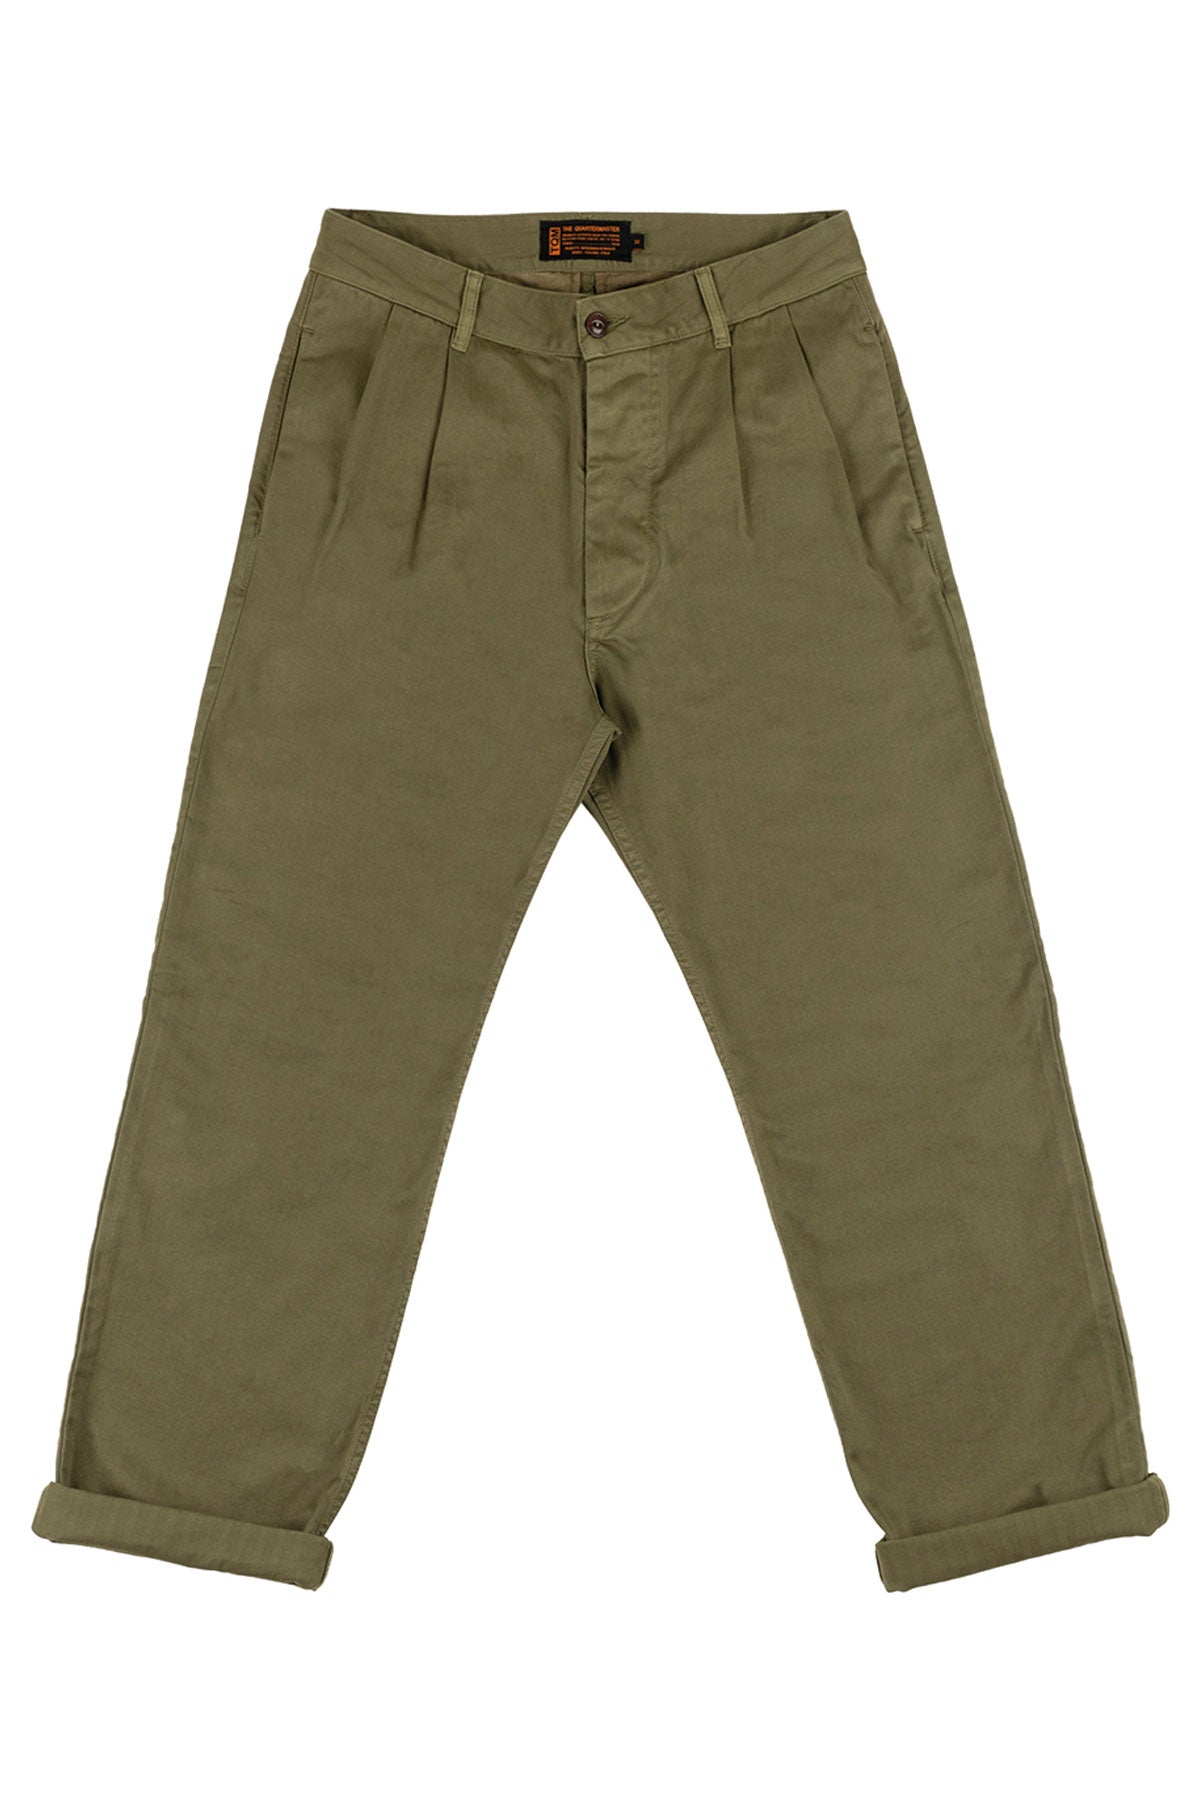 The Quartermaster -  French Chino HBT Straight Leg Trousers With Pleats in Army Green